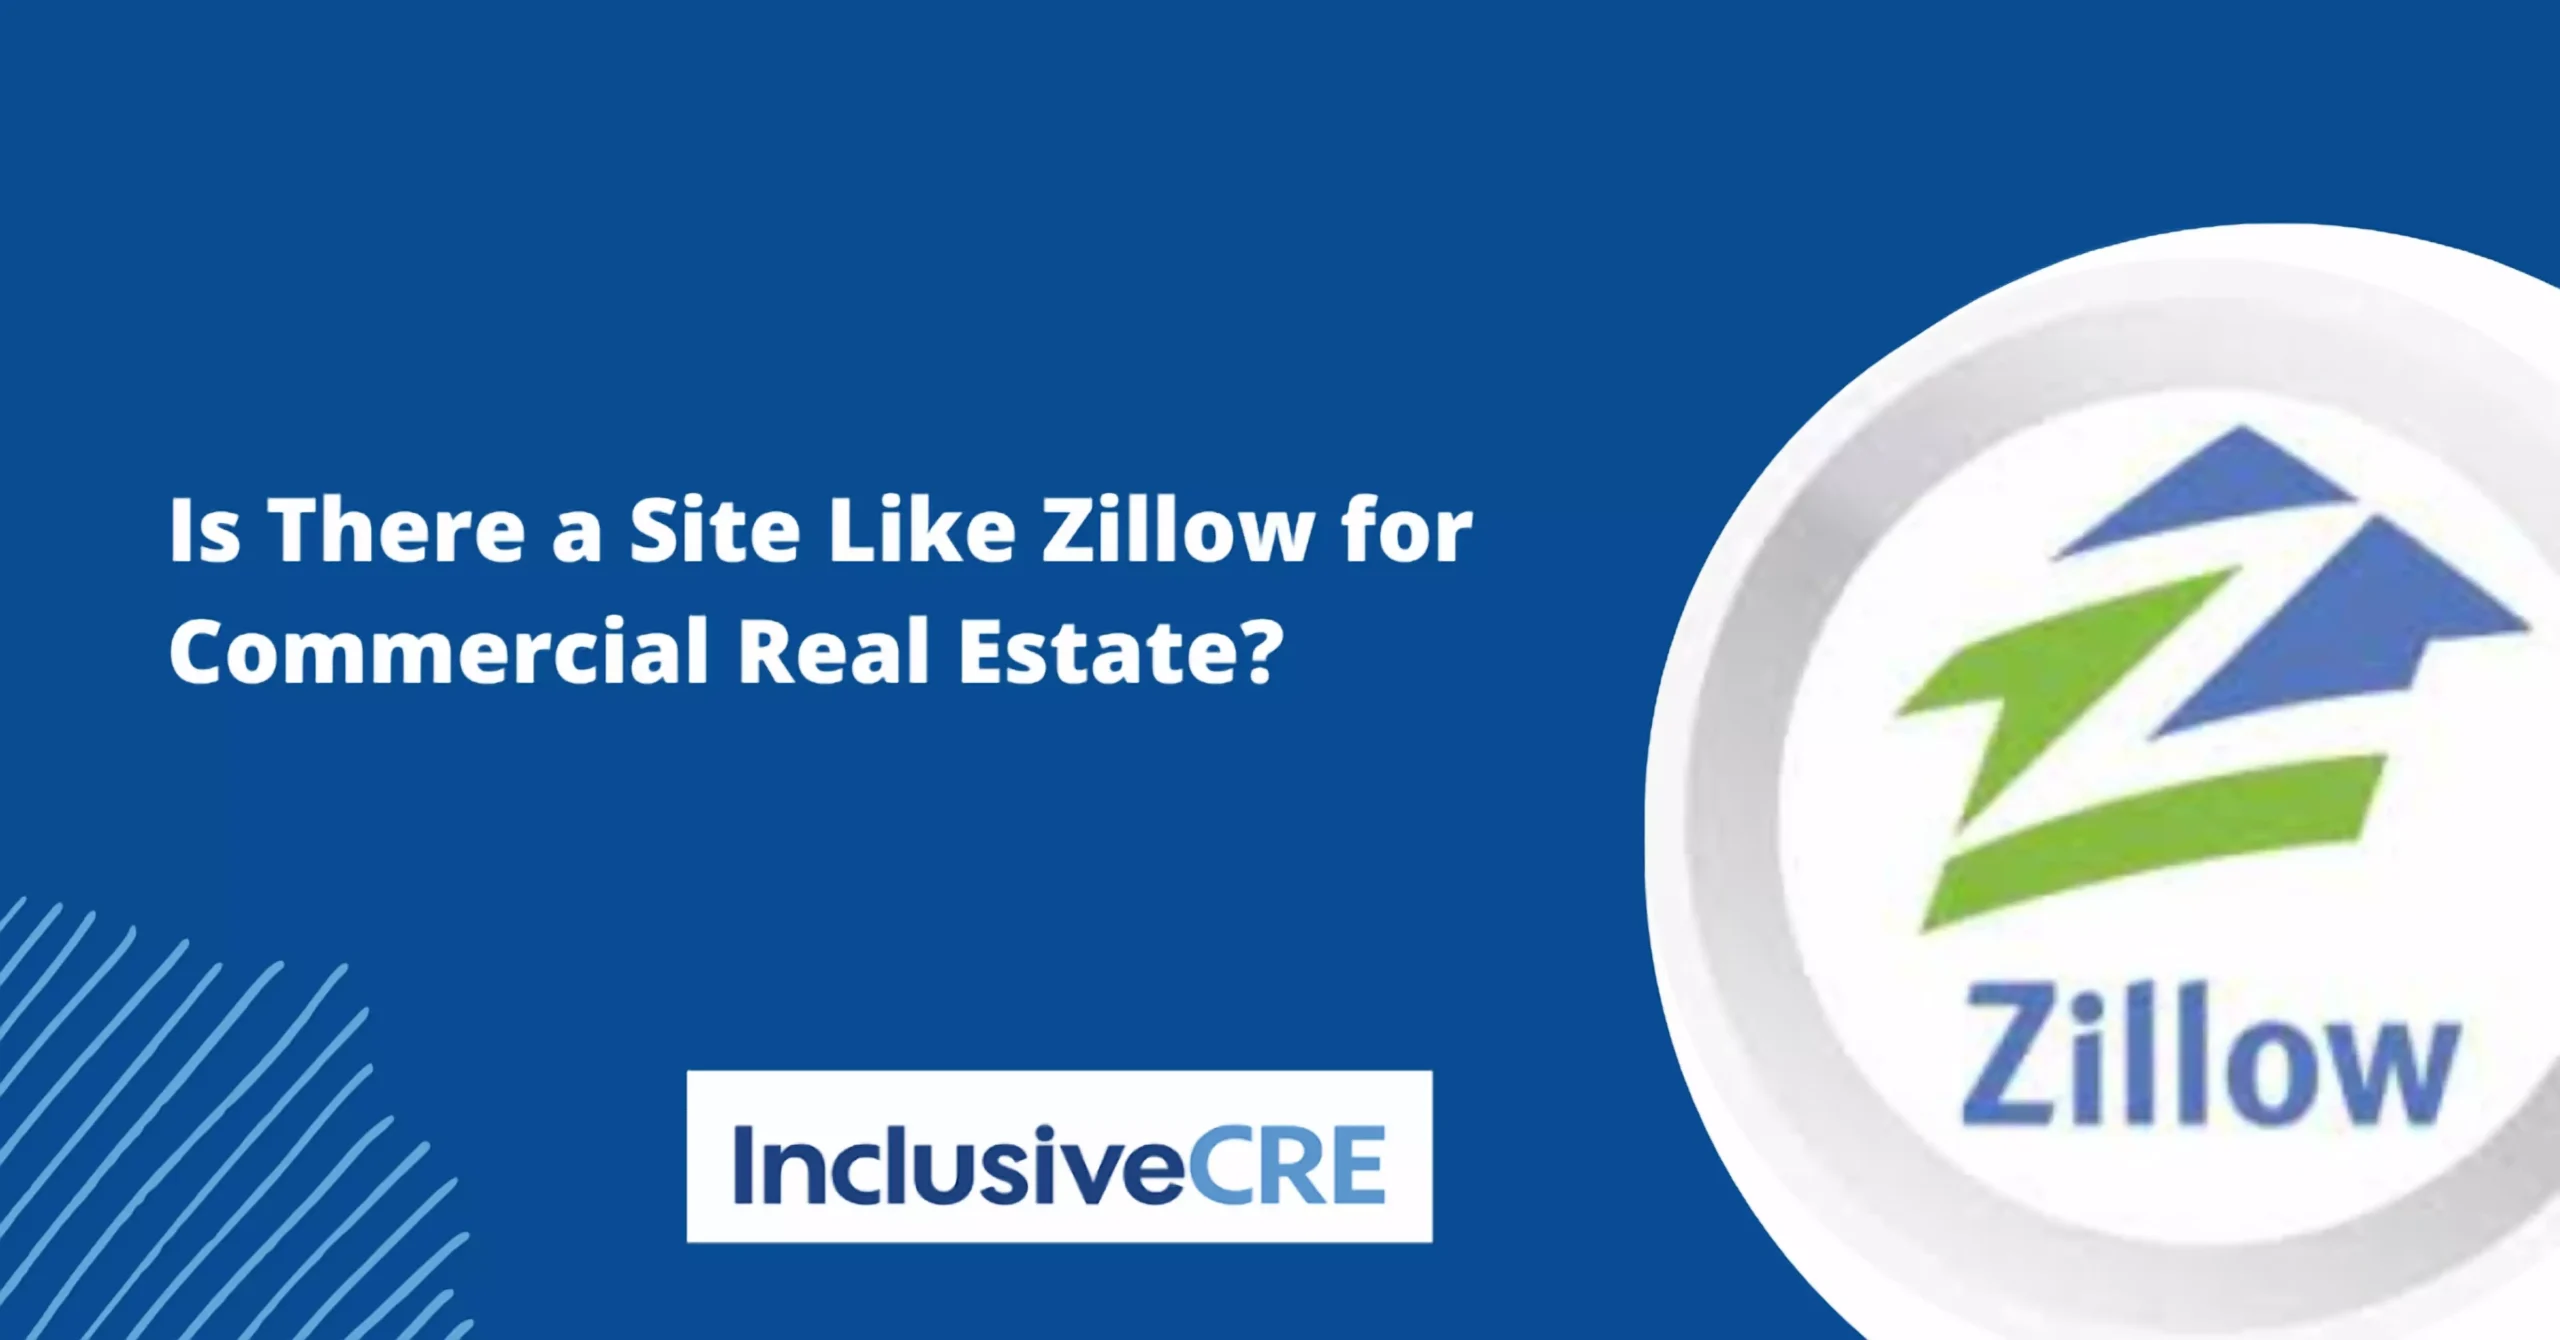 Article image about whether there is an equivalent of Zillow for commercial real estate.